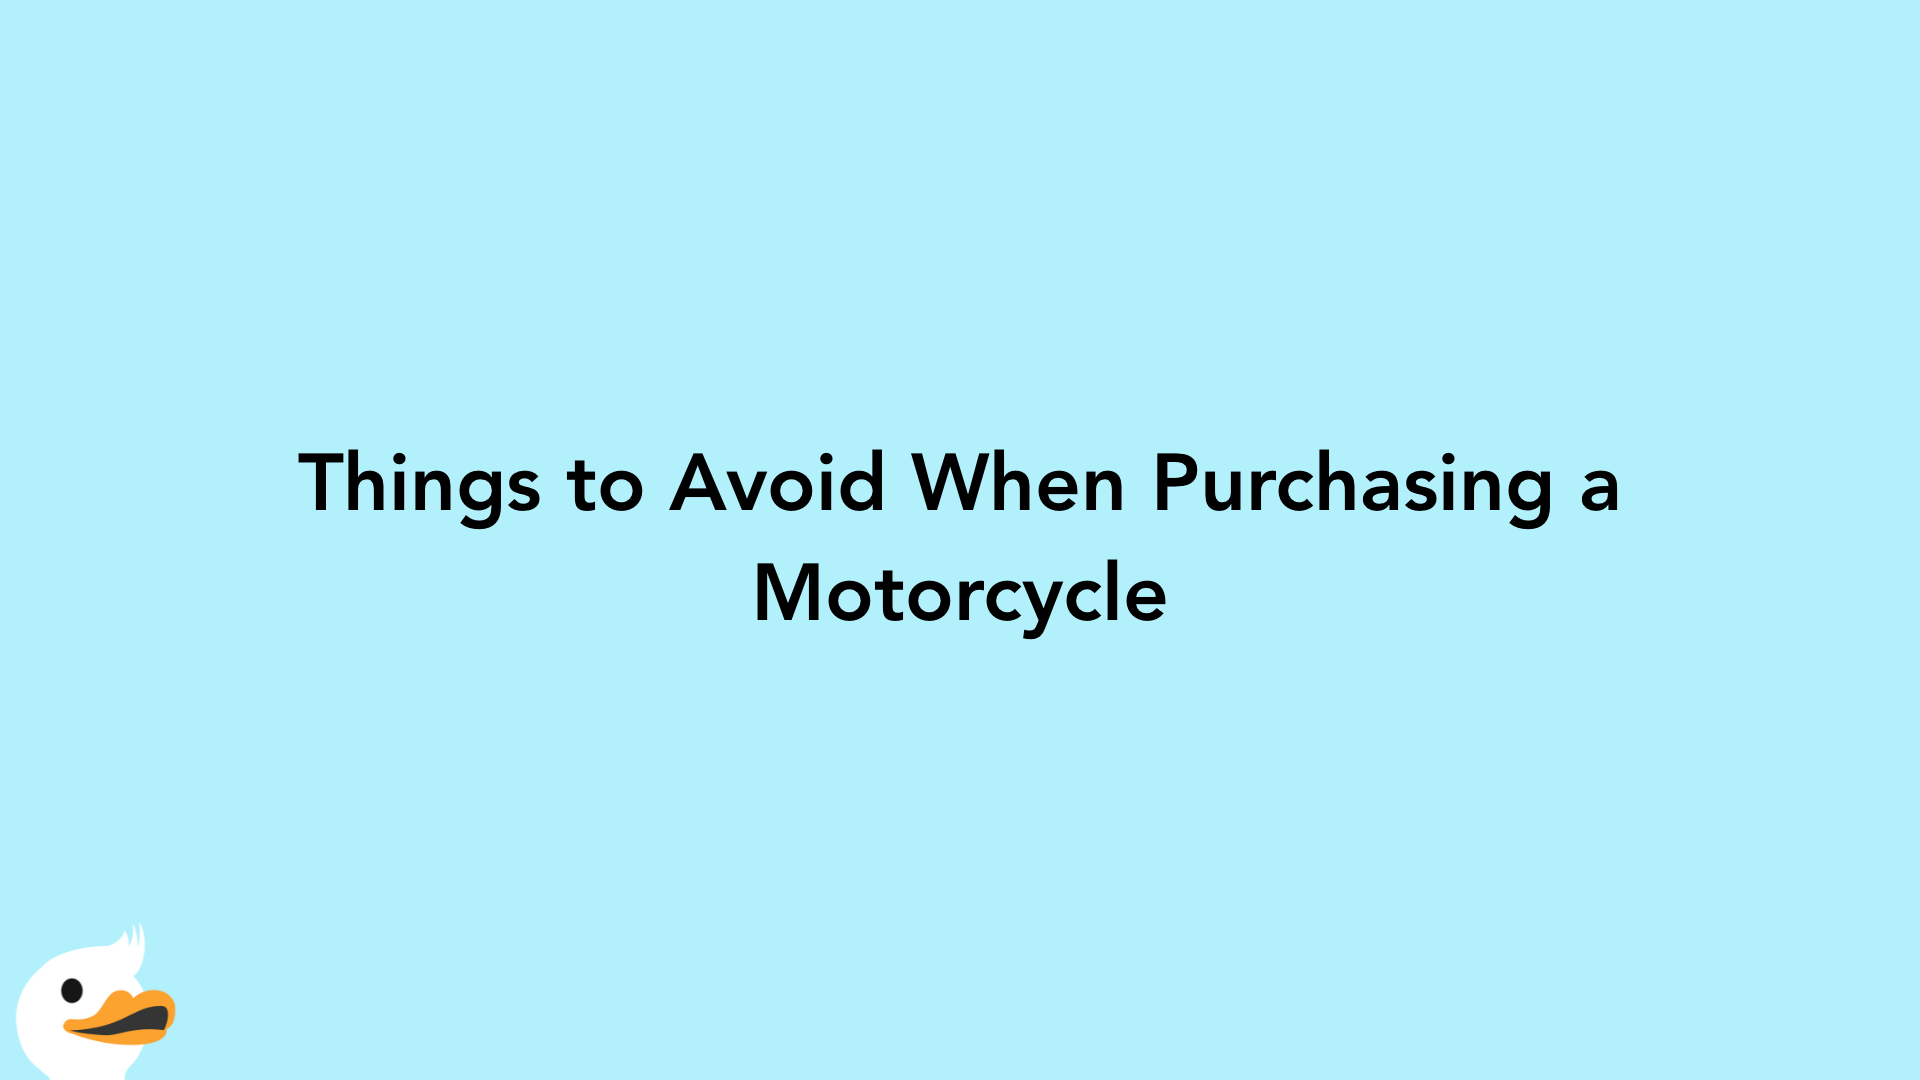 Things to Avoid When Purchasing a Motorcycle